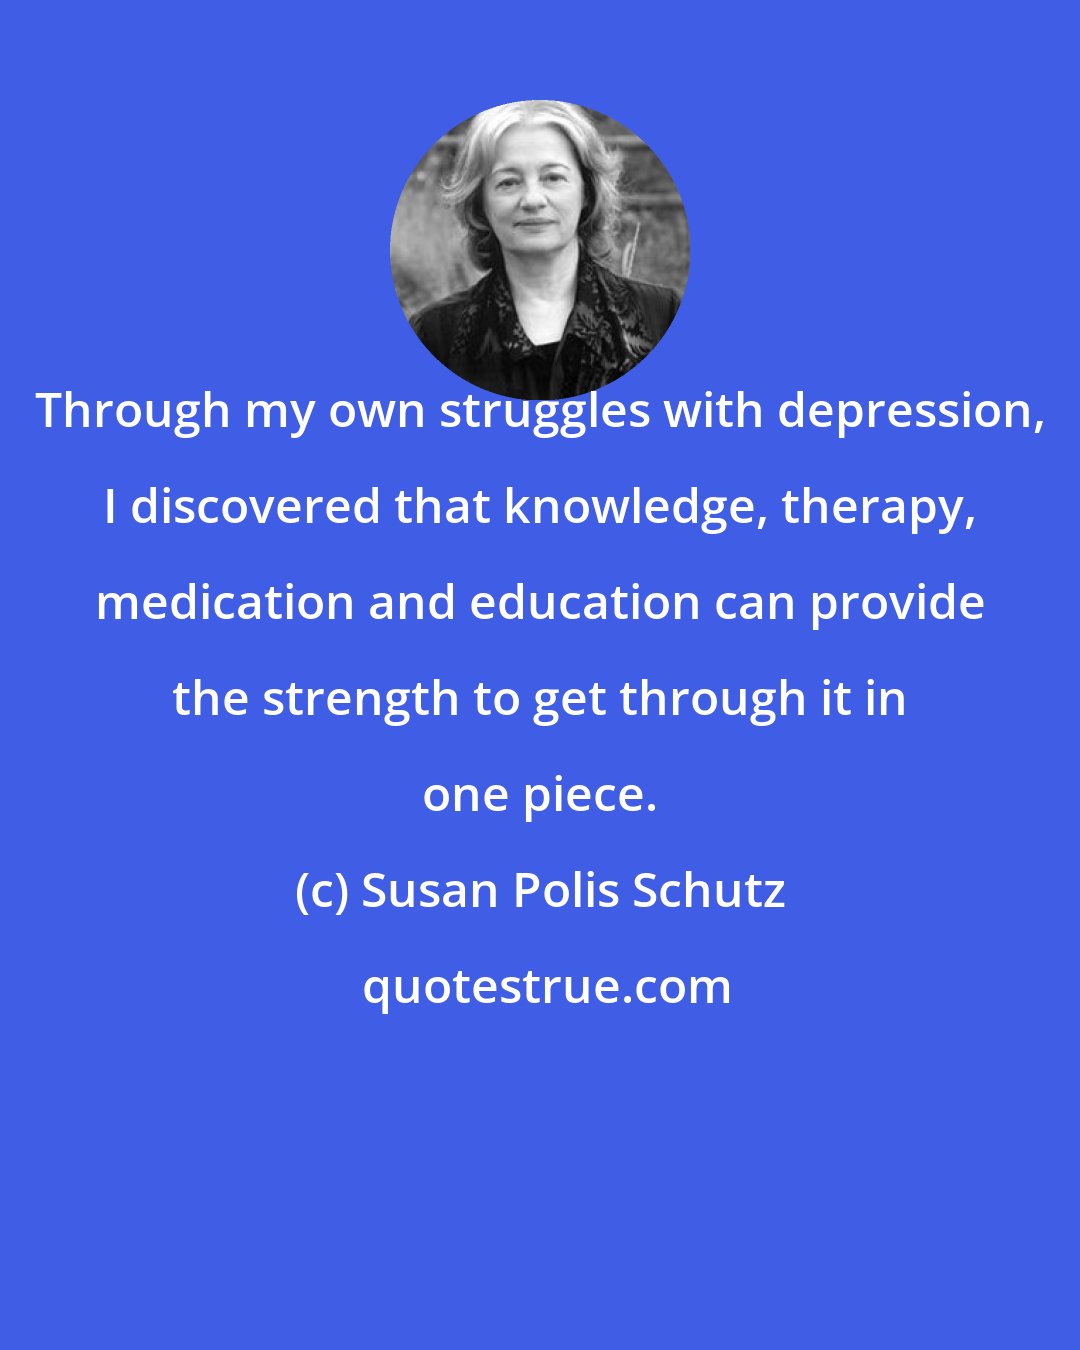 Susan Polis Schutz: Through my own struggles with depression, I discovered that knowledge, therapy, medication and education can provide the strength to get through it in one piece.